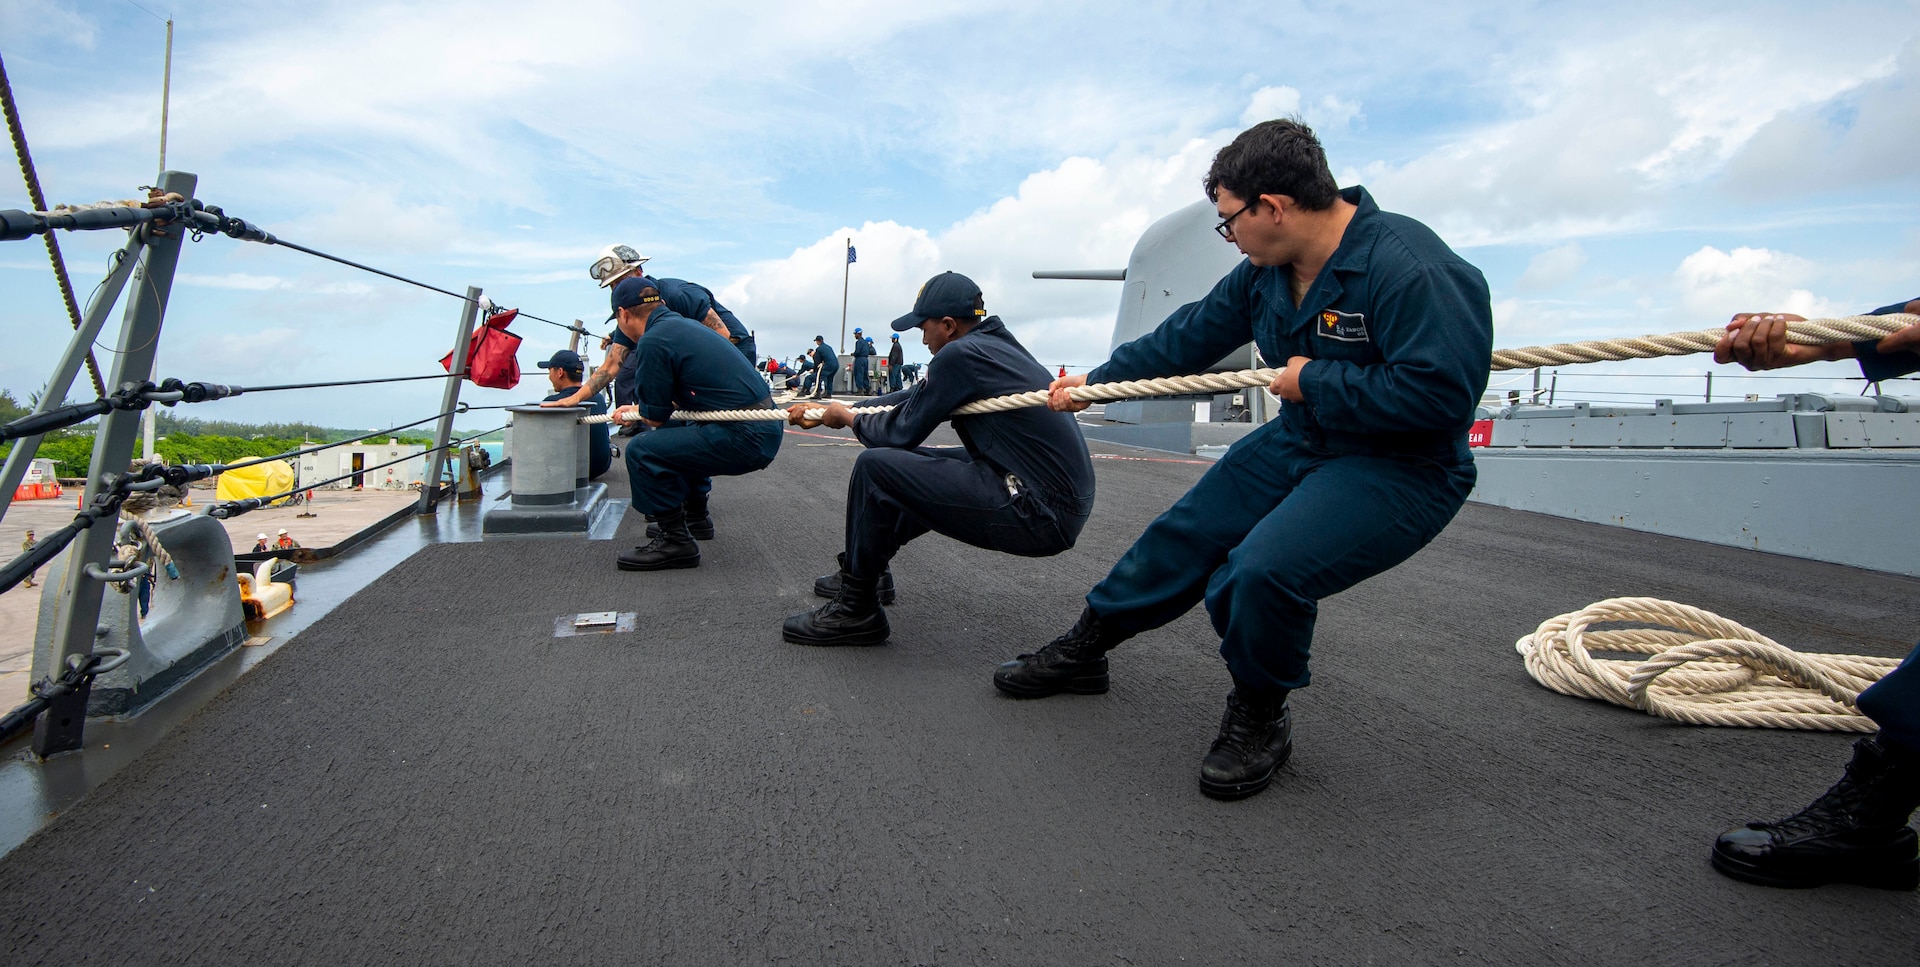 U.S. Navy Sailors heave line during sea-and-anchor detail on the foc'scle of the Arleigh Burke-class guided-missile destroyer USS Paul Hamilton (DDG 60) during a routine port visit. Paul Hamilton, part of the Nimitz Carrier Strike Group, is in U.S. 7th Fleet conducting routine operations. 7th Fleet is the U.S. Navy’s largest forward-deployed numbered fleet, and routinely interacts and operates with Allies and partners in preserving a free and open Indo-Pacific region. (U.S. Navy photo by Mass Communication Specialist 2nd Class Elliot Schaudt)